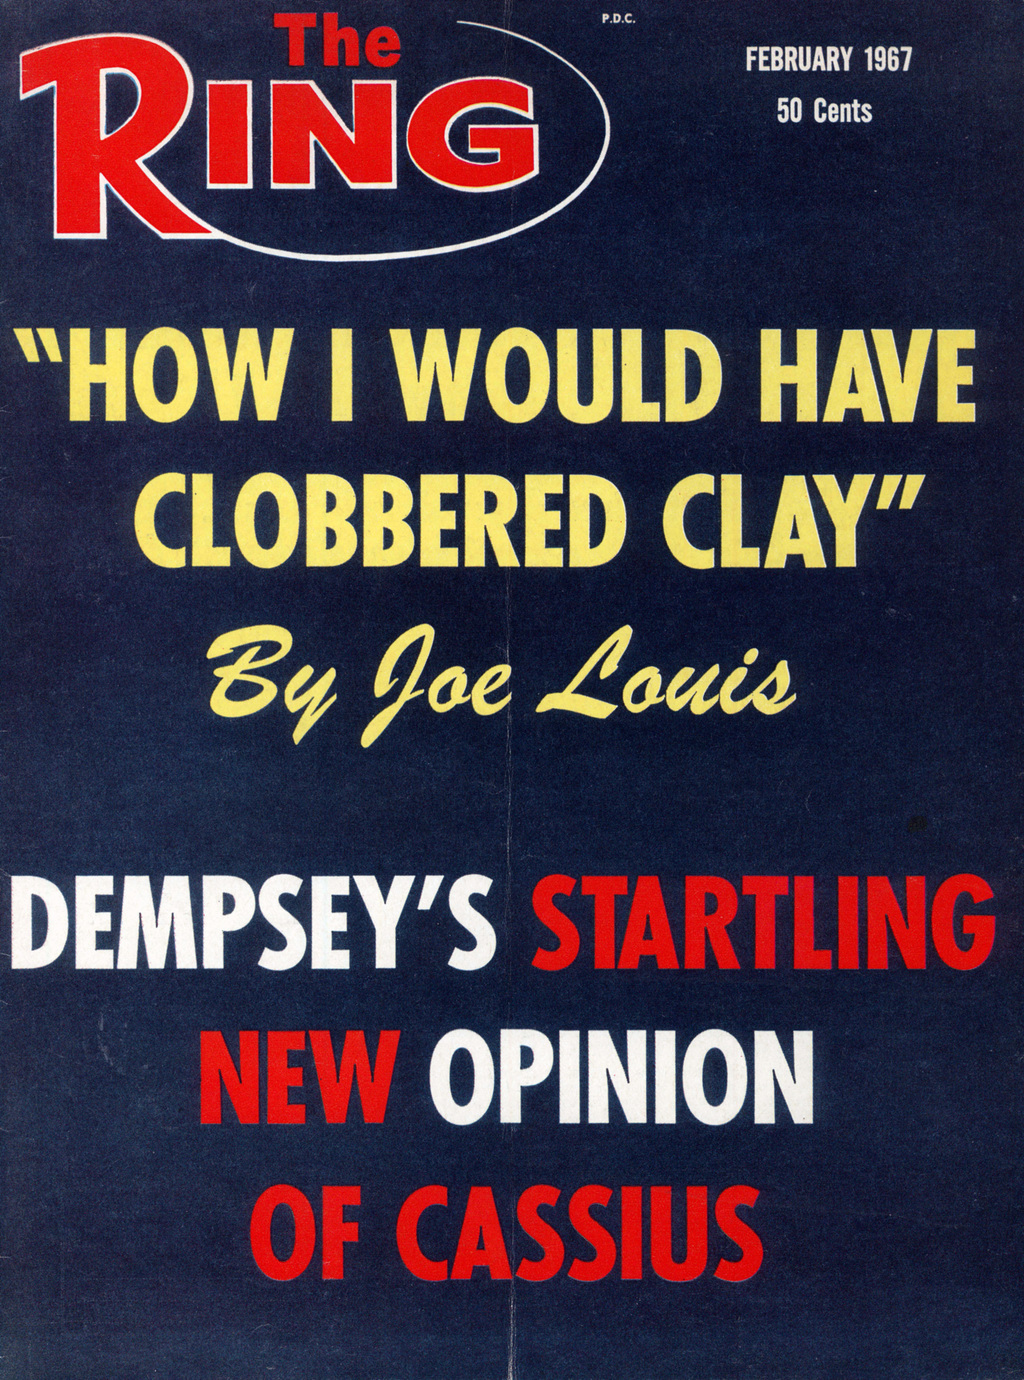 From the archive: 'How I would have clobbered Cassius Clay' by Joe Louis -  The Ring